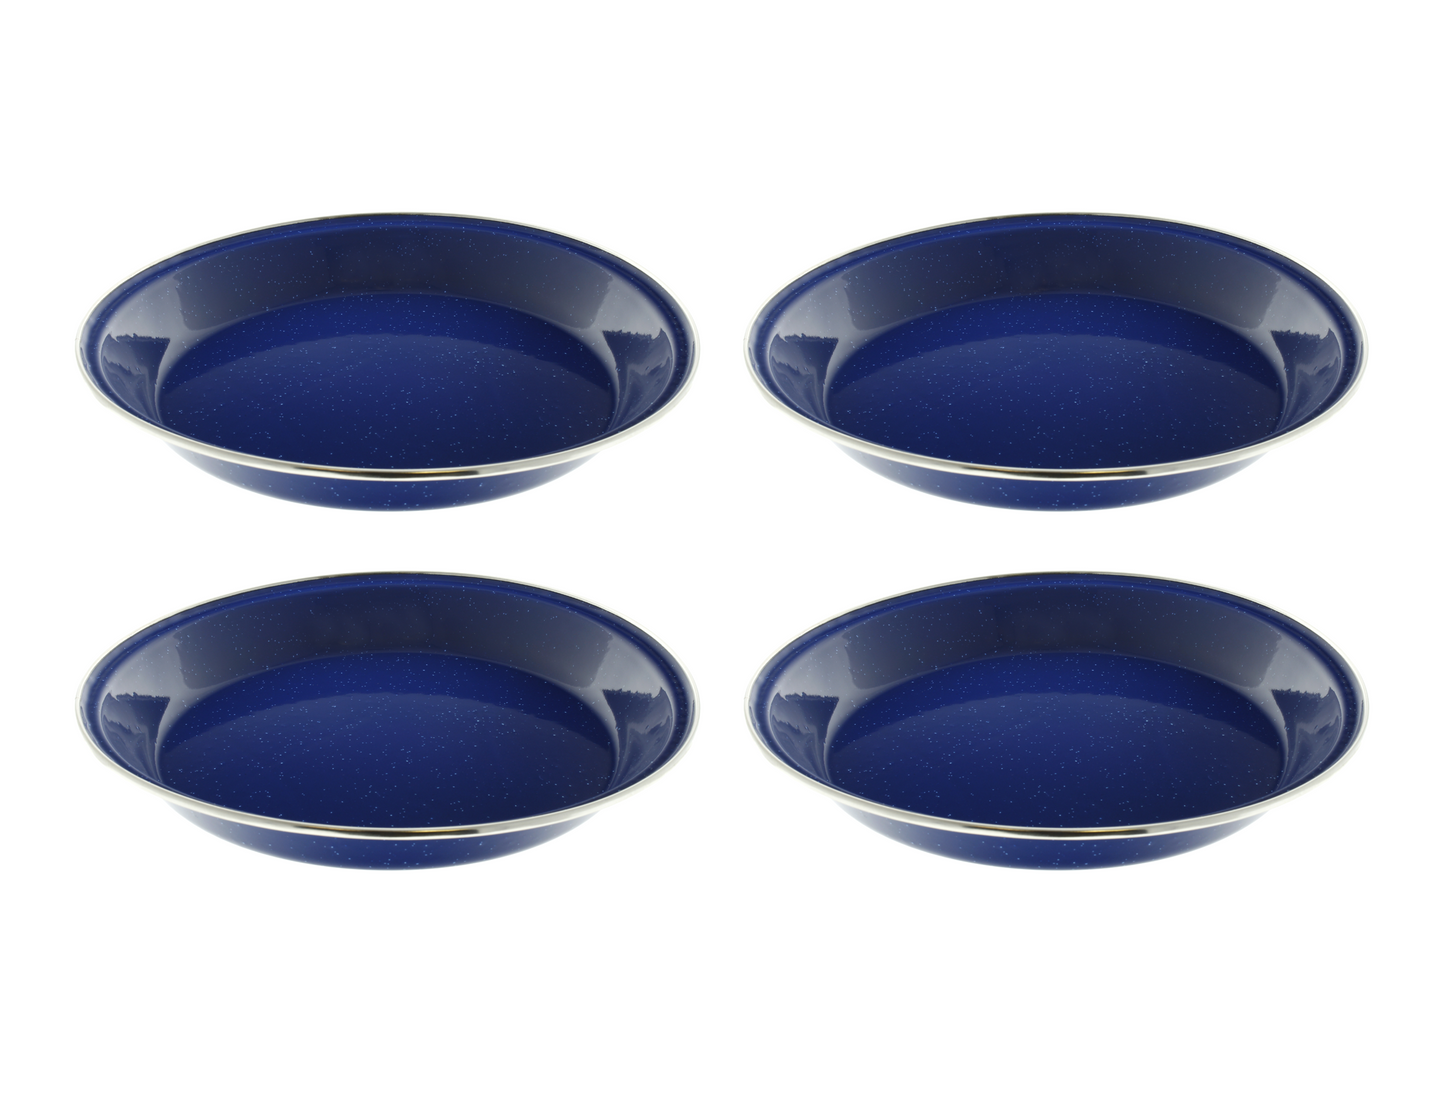 10" Enamel Camping Plates - 4 Pack Metal Camping Plates with Blue Enamel Finish - For Camping, Hiking & Picnics